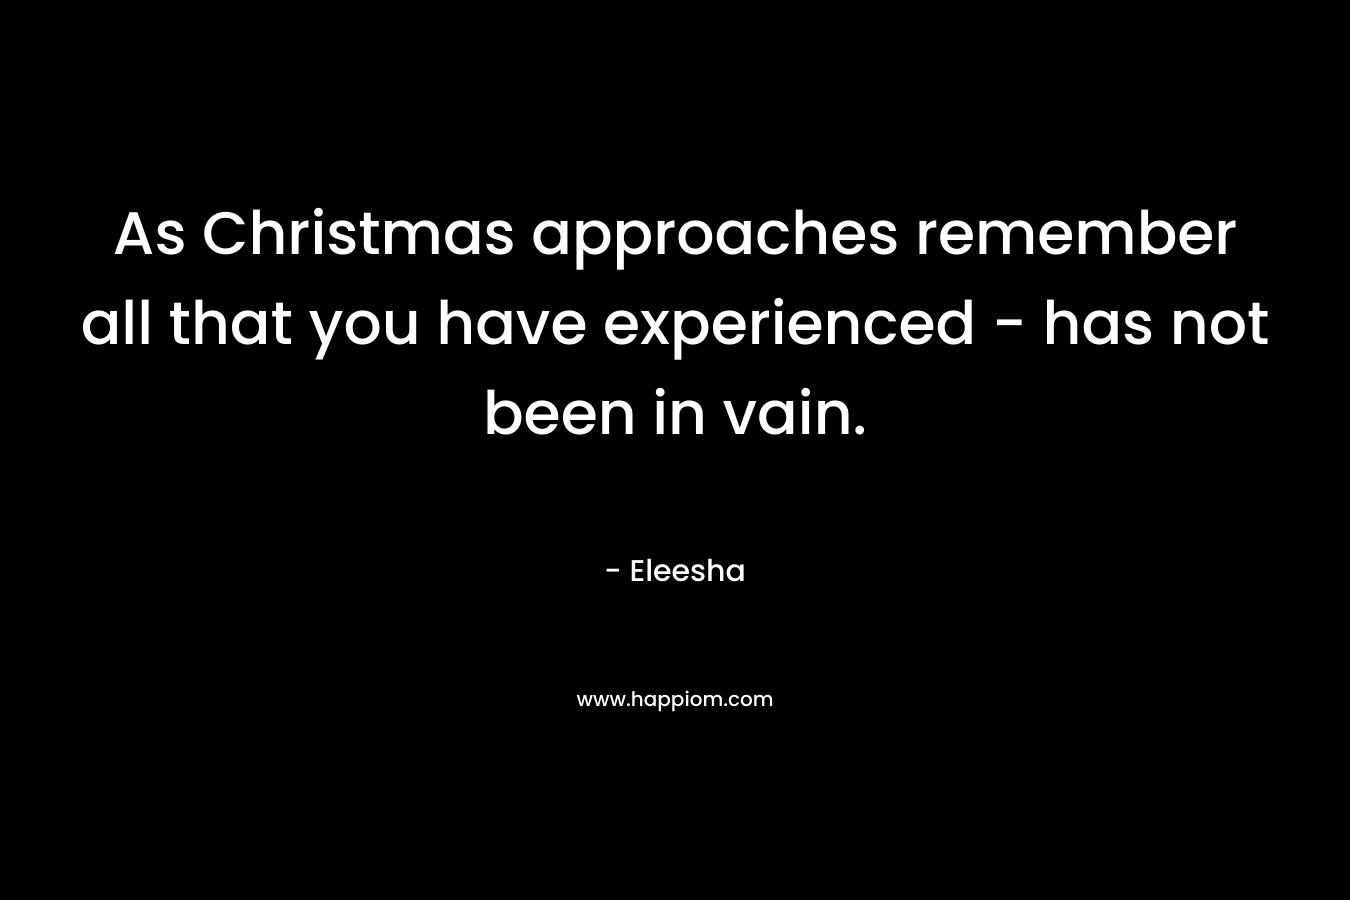 As Christmas approaches remember all that you have experienced - has not been in vain.